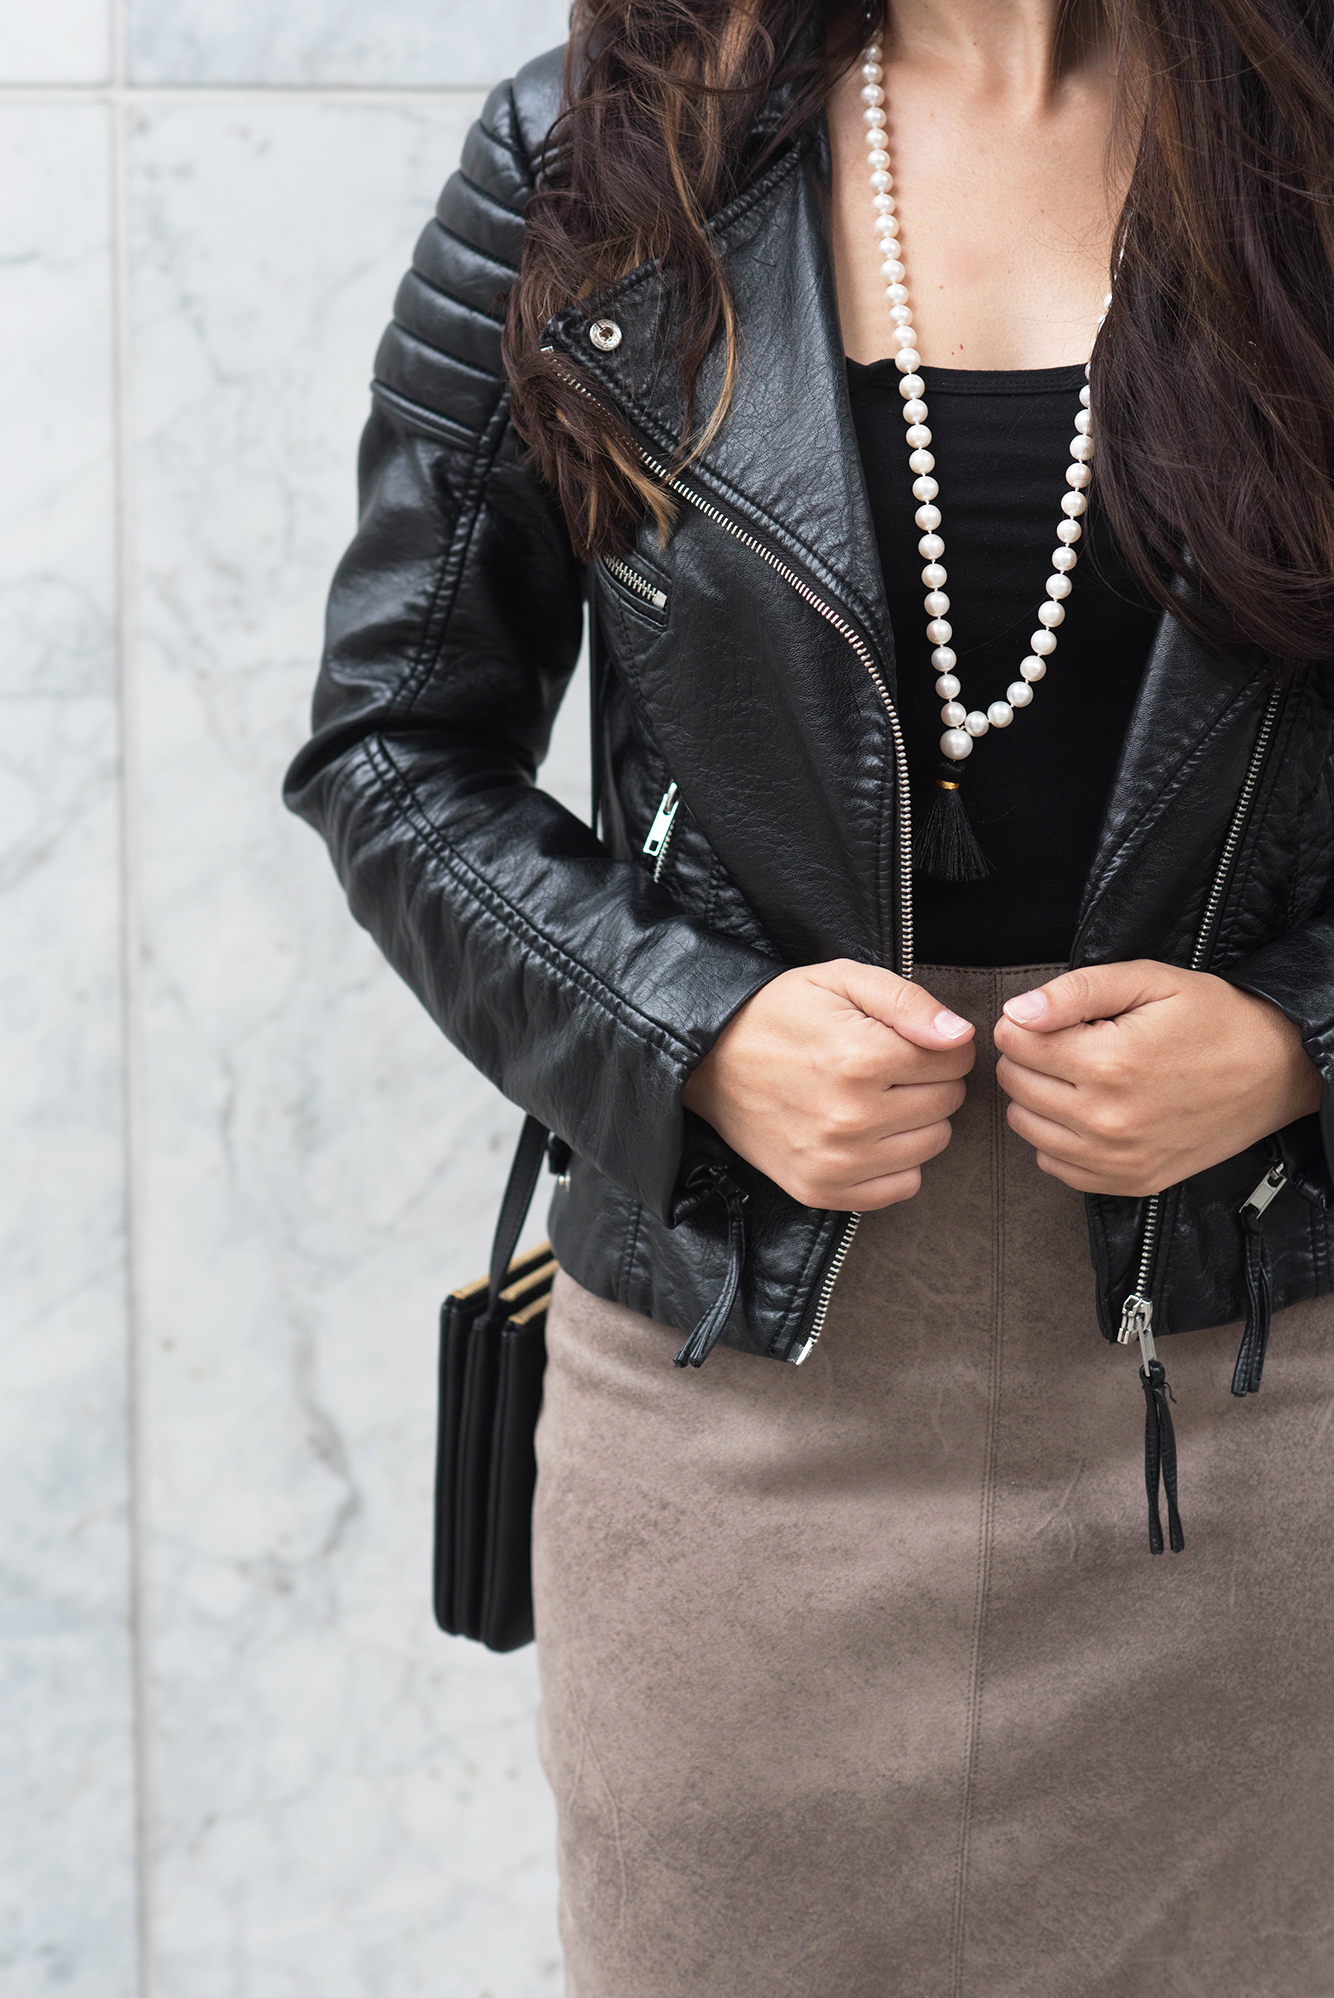 coco-and-vera-top-vancouver-style-blog-top-canadian-style-blog-top-blogger-outfit-details-hm-vegan-leather-jacket-cc-lifestyles-pearl-necklace-old-navy-tank-le-chateau-skirt-copy